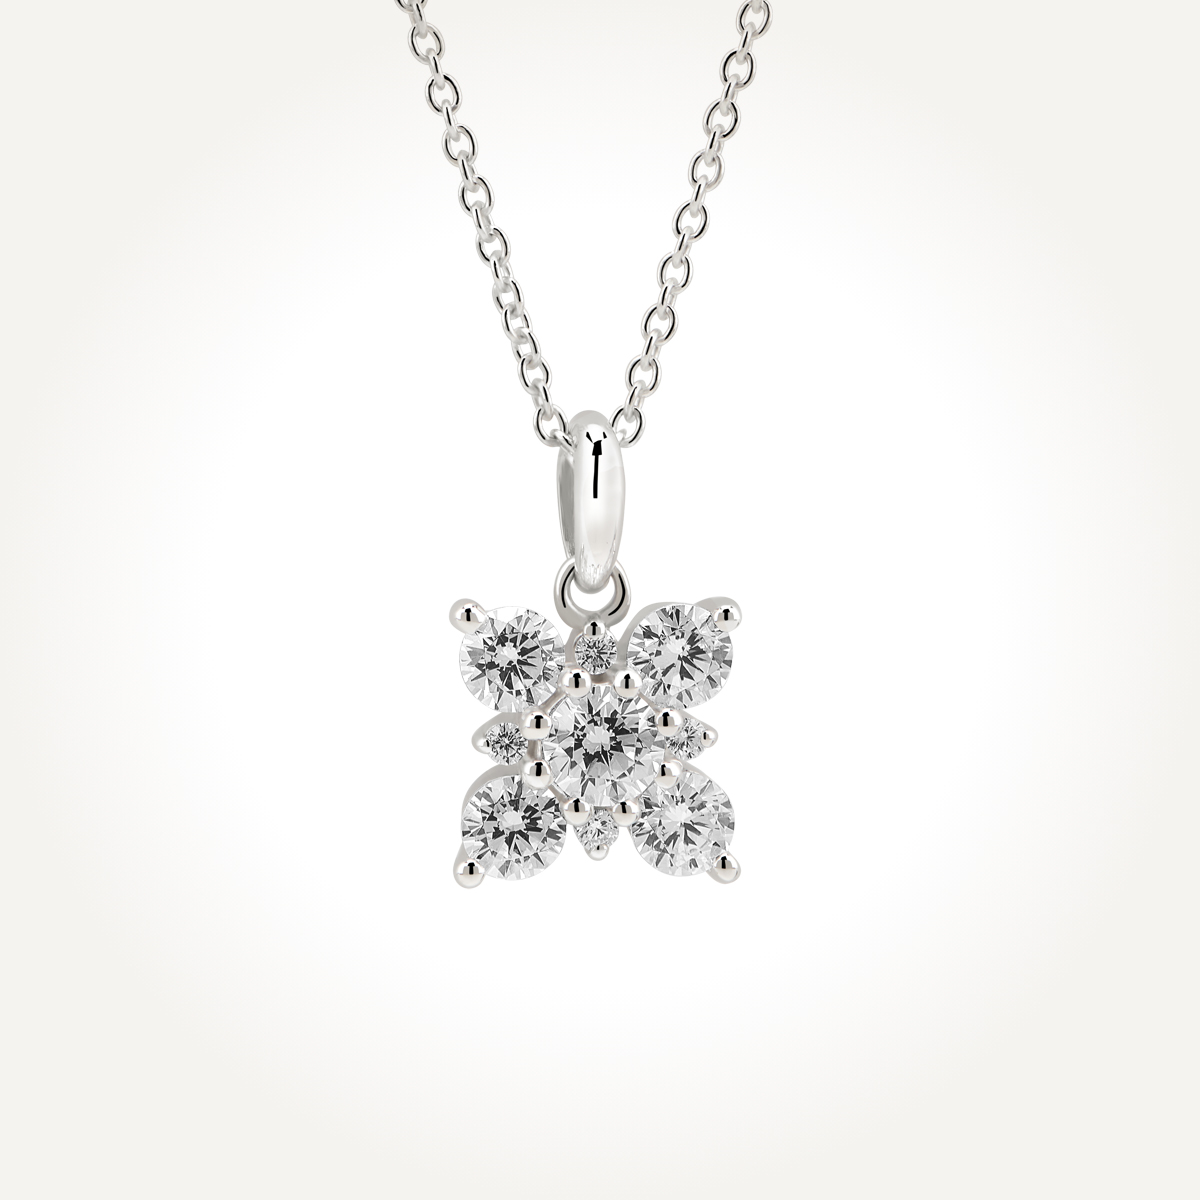 14KT White Gold Diamond Cluster Necklace 0.72 CT. T.W.